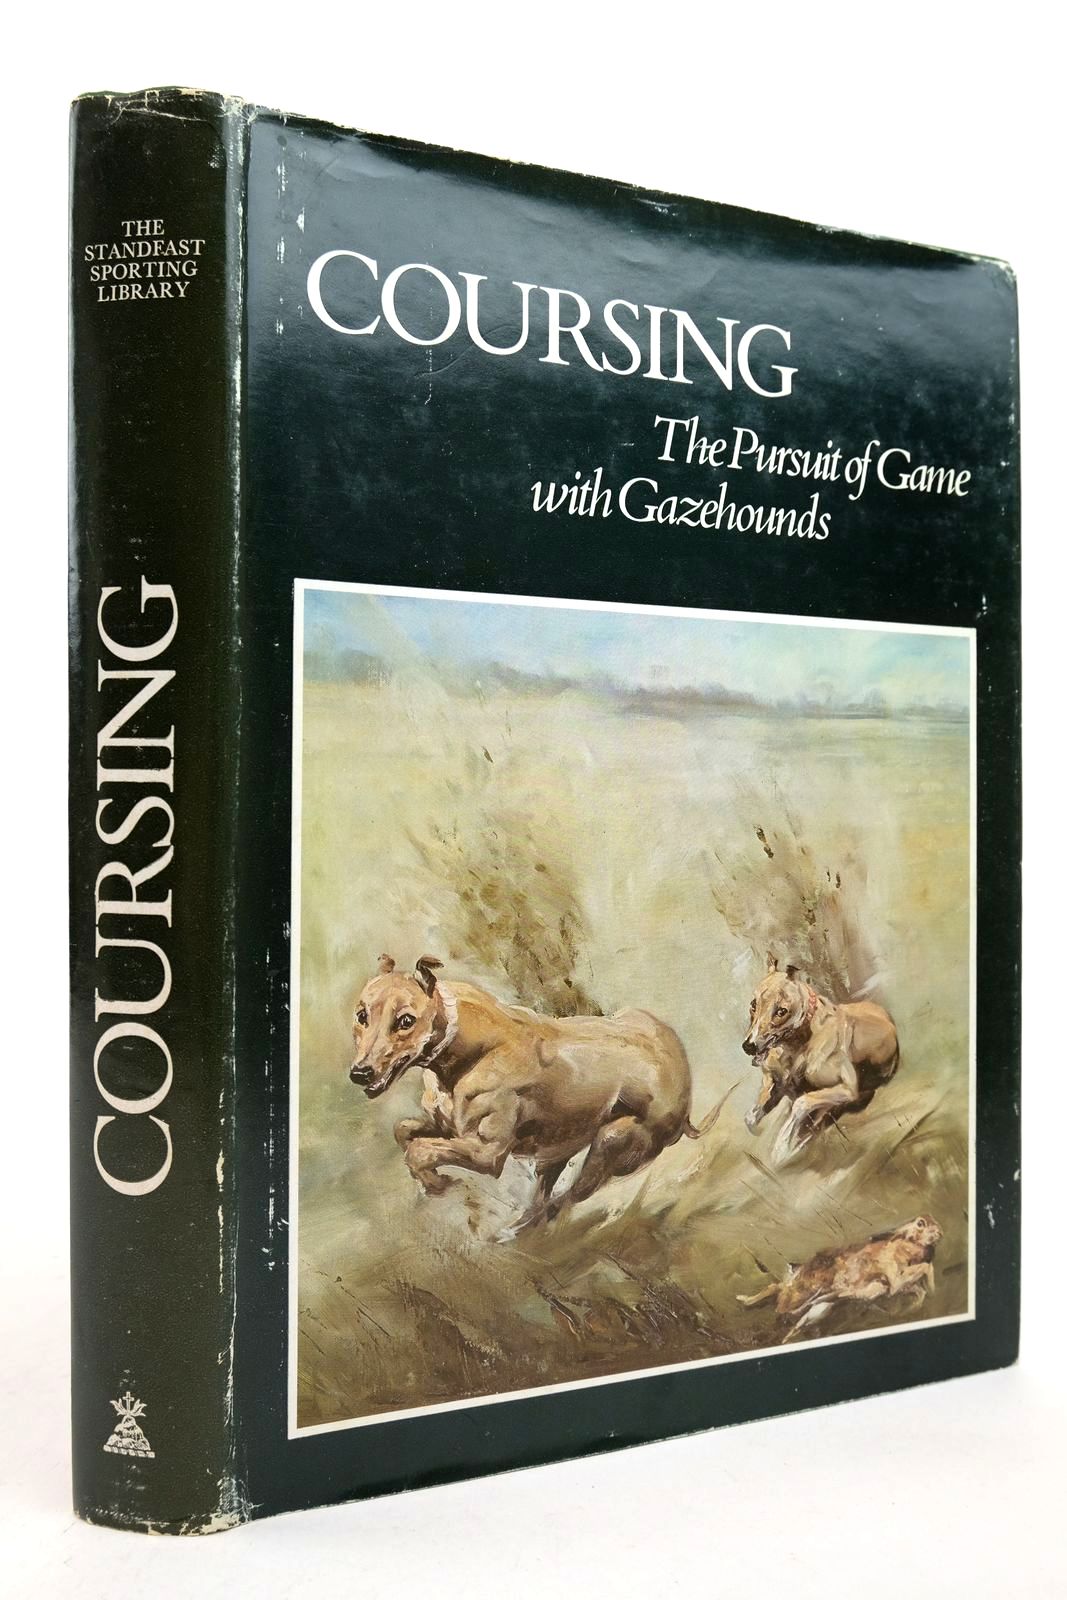 Photo of COURSING: THE PURSUIT OF GAME WITH GAZEHOUNDS written by Grant-Rennick, Richard Hope, Thomas et al, published by The Standfast Press (STOCK CODE: 2139748)  for sale by Stella & Rose's Books